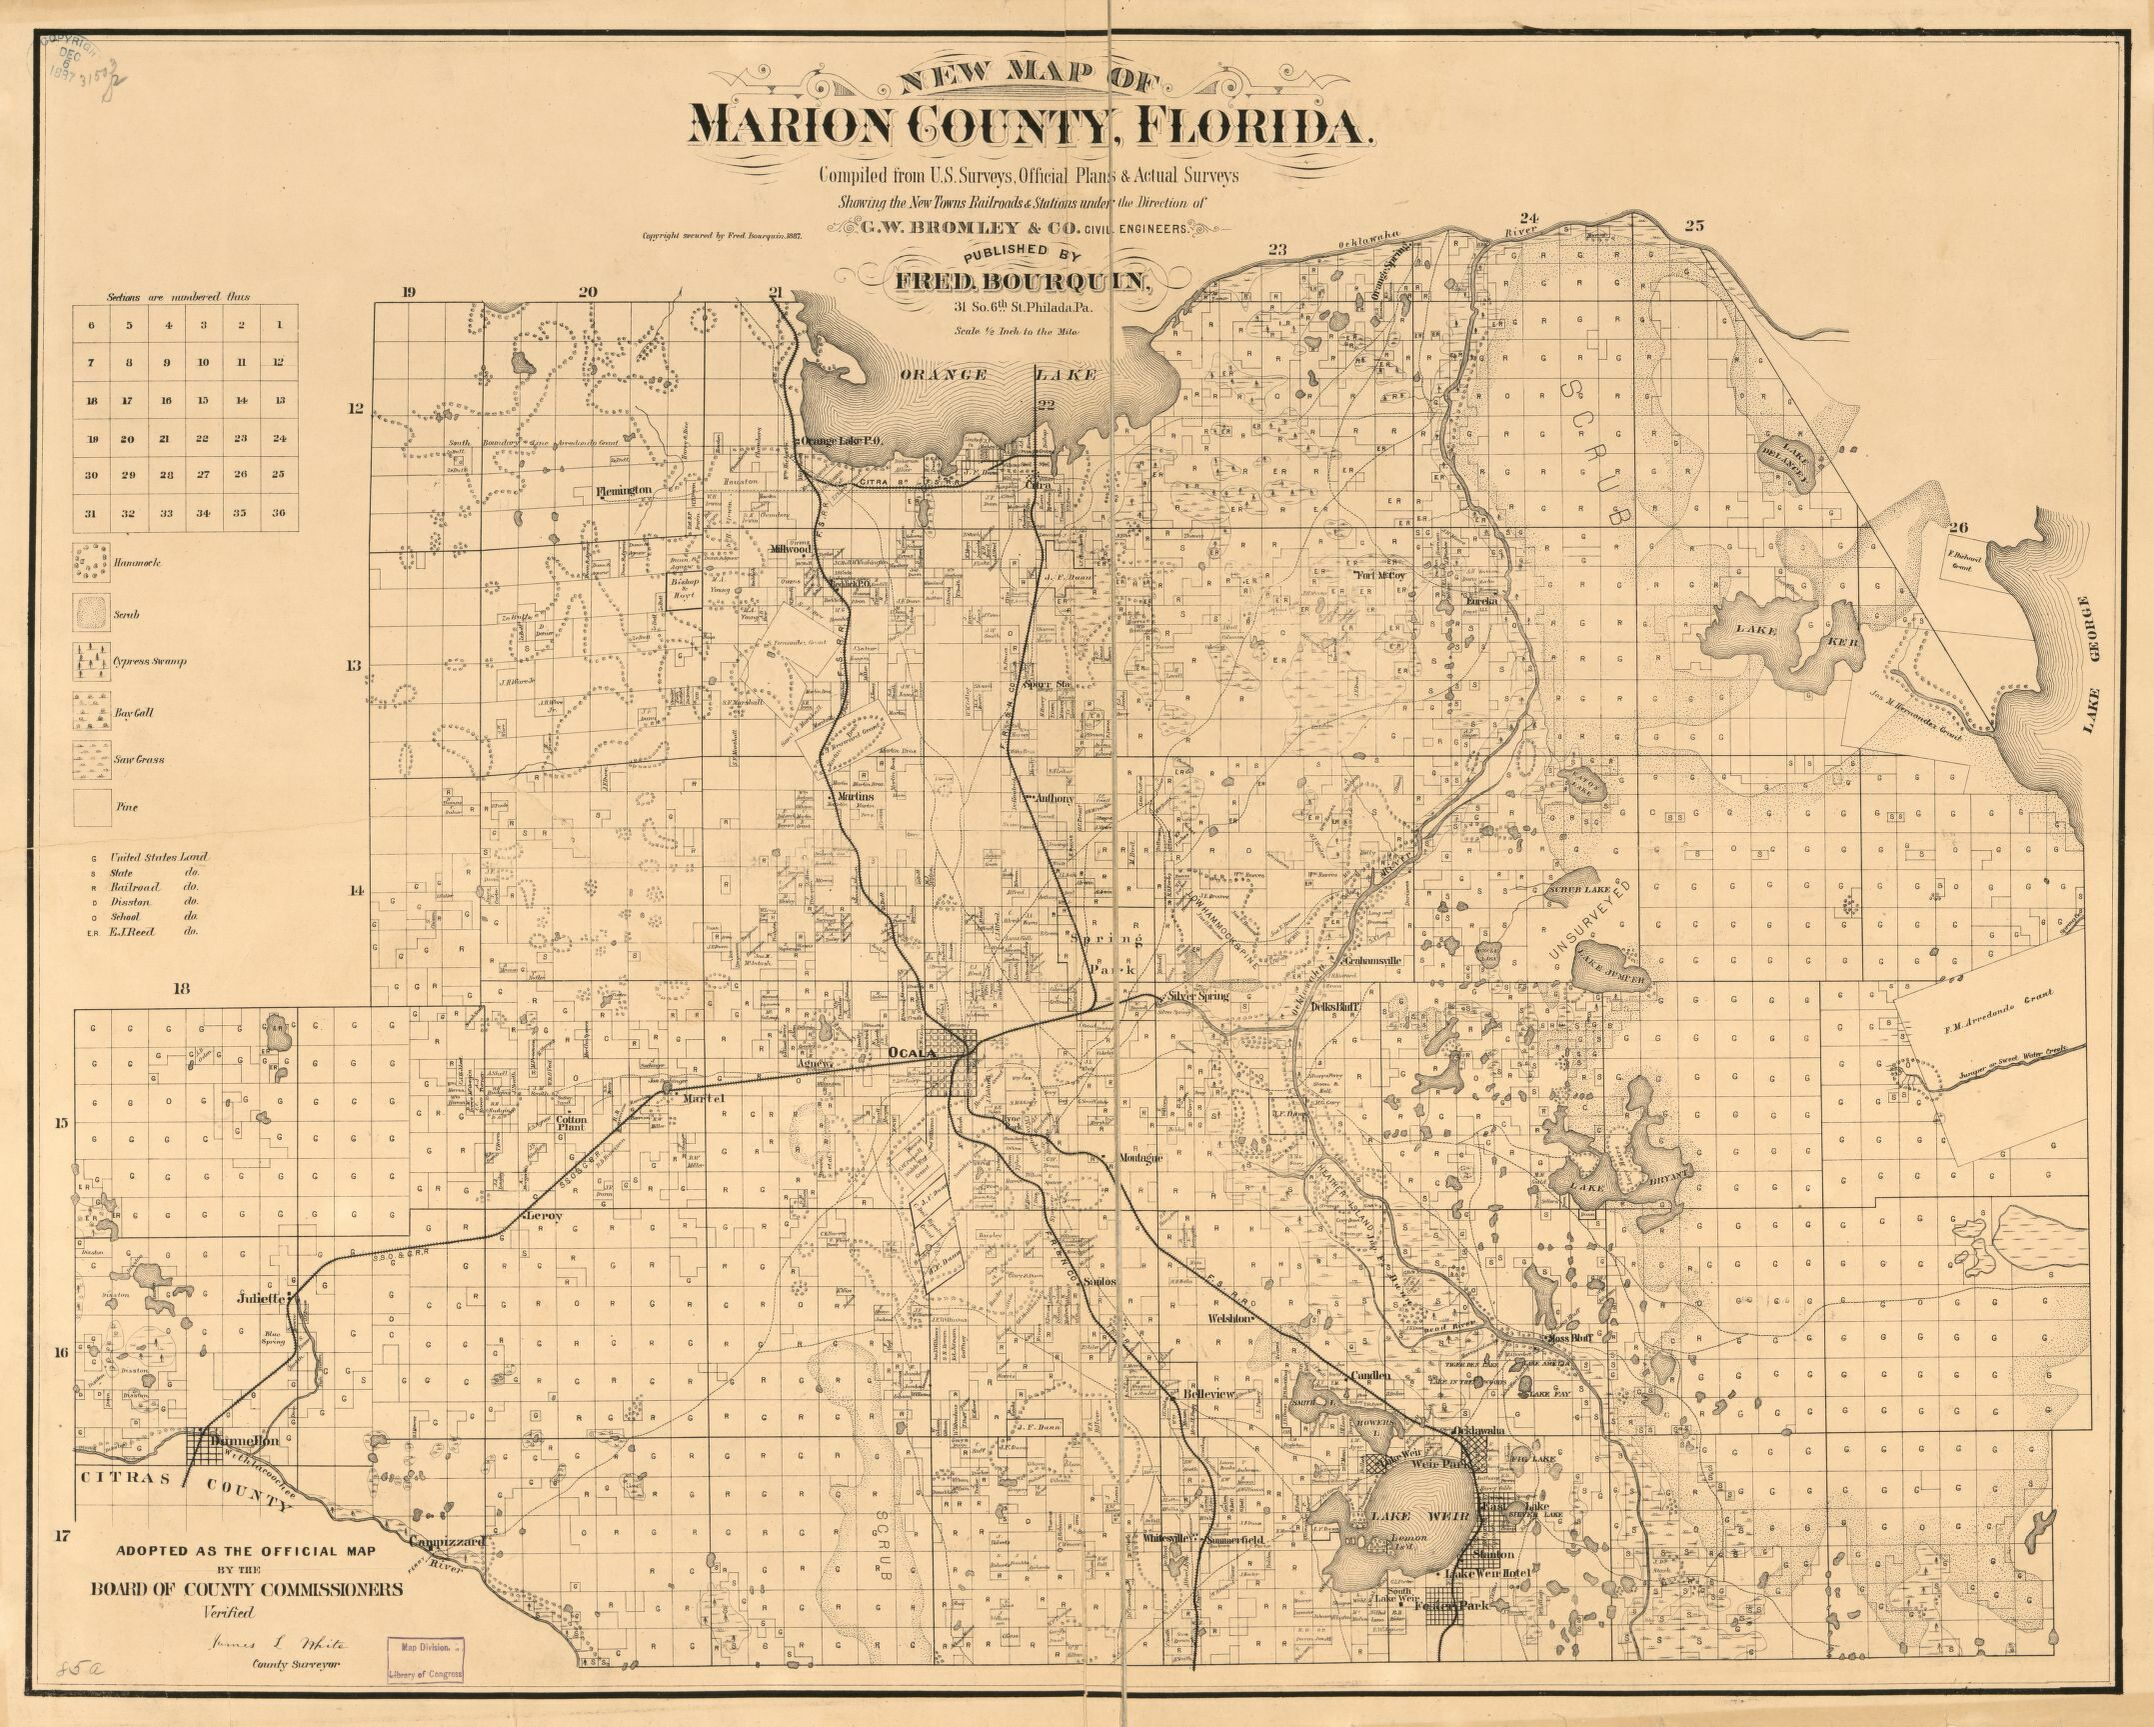 New Map Of Marion County, Florida | Library Of Congress - Marion County Florida Plat Maps